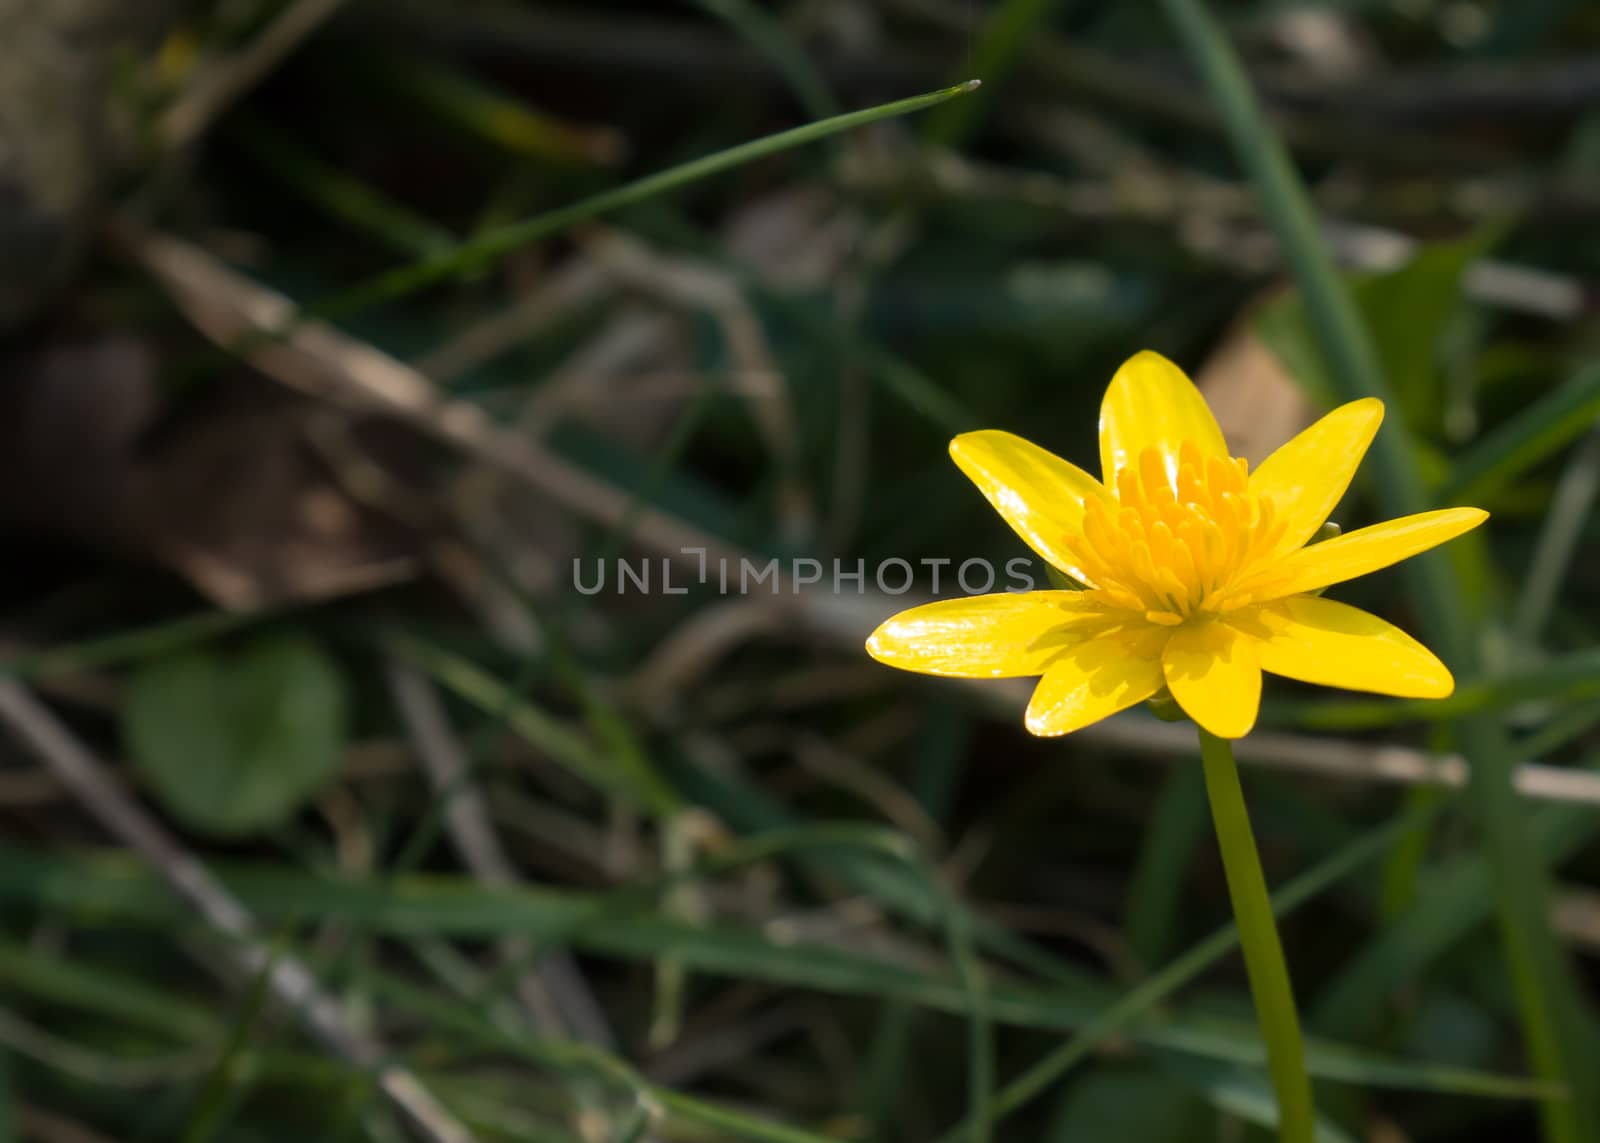 Yellow Lesser Celandine flower in English countryside with space for copy or text.